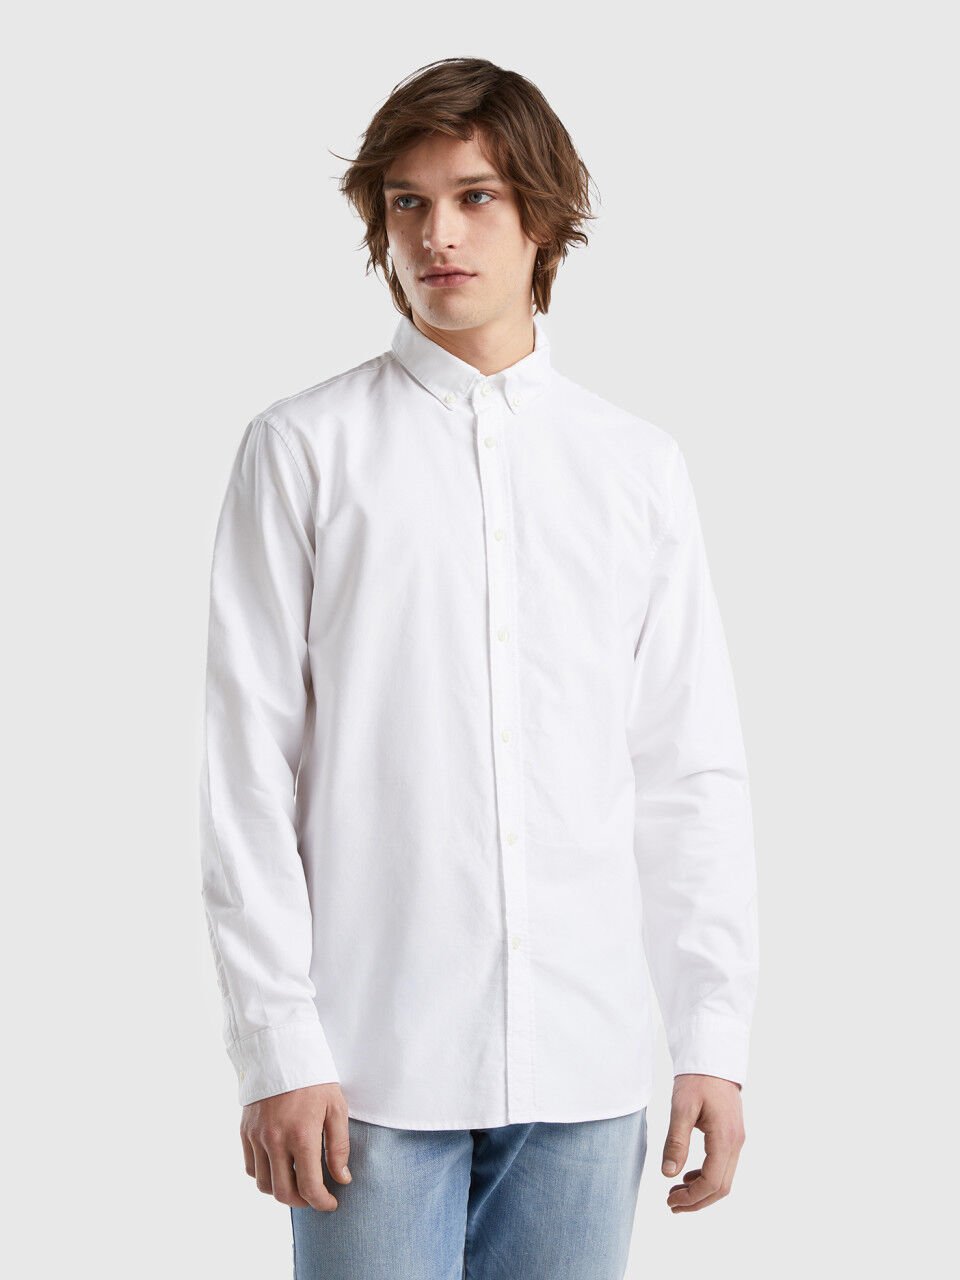 Slim fit shirt in 100% cotton